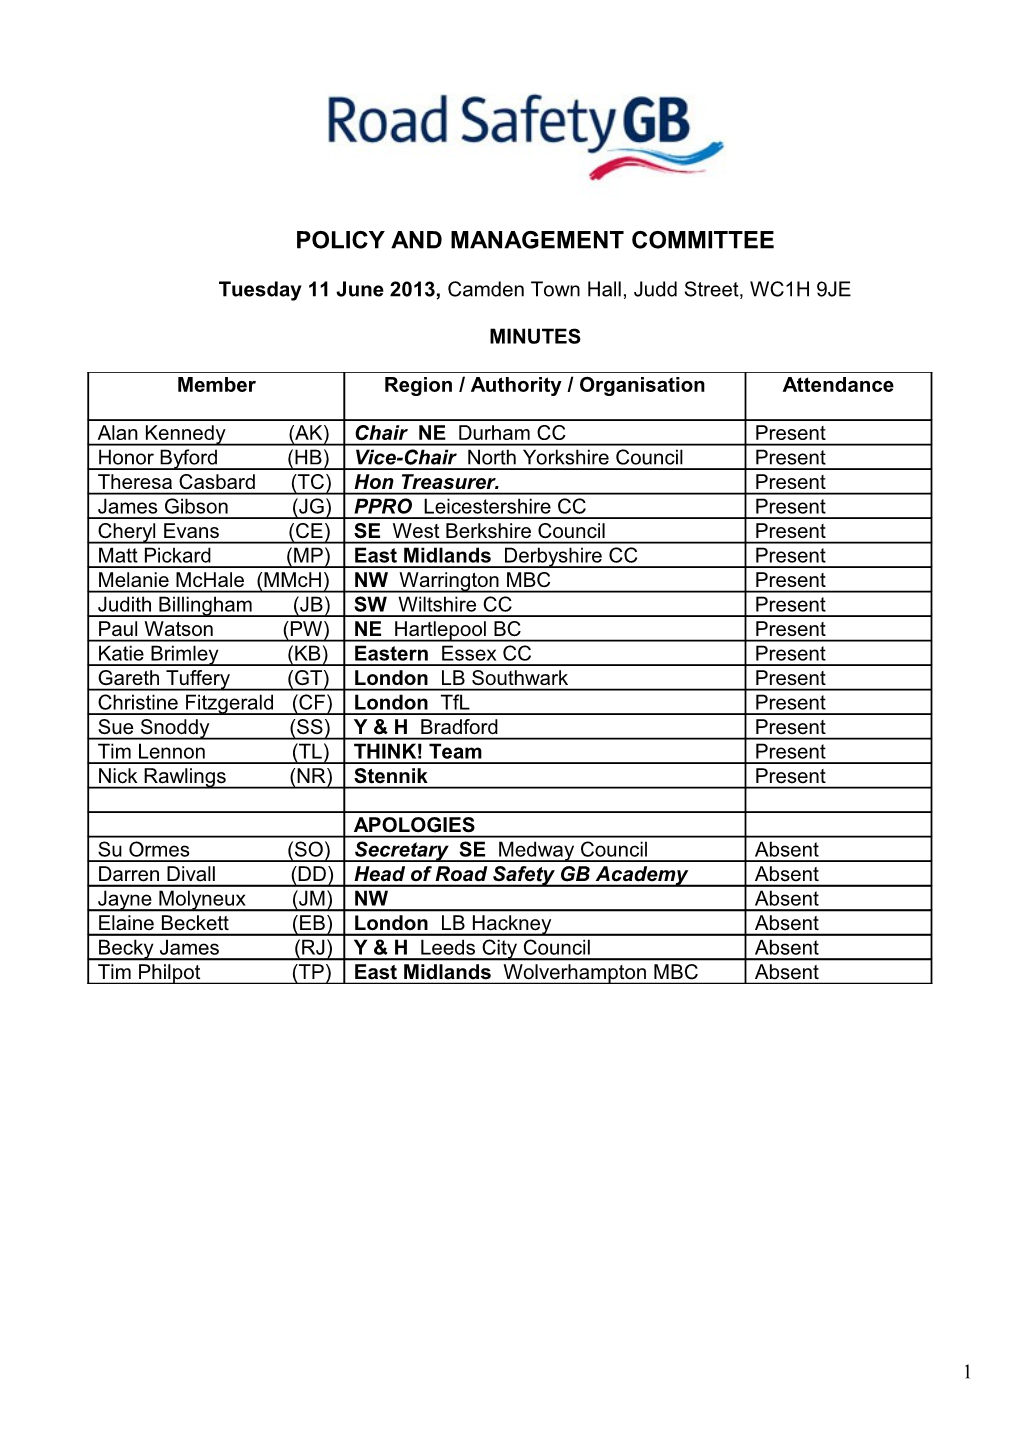 Policy and Management Committee